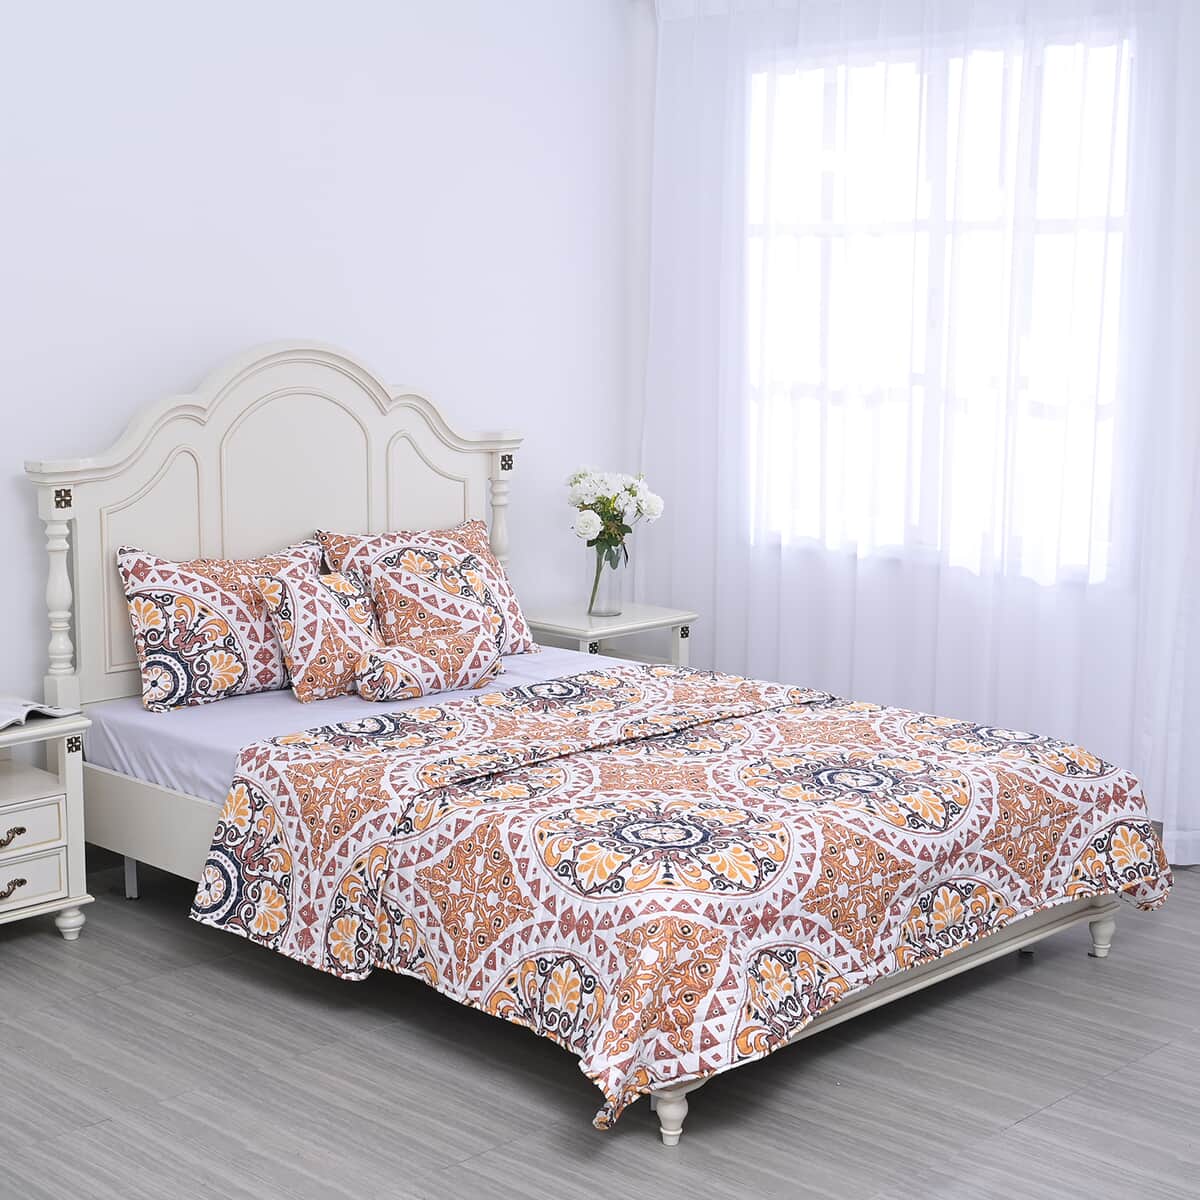 Homesmart Yellow and Brick Flower Printed 6pcs Quilt Set - King (100% Microfiber) image number 0